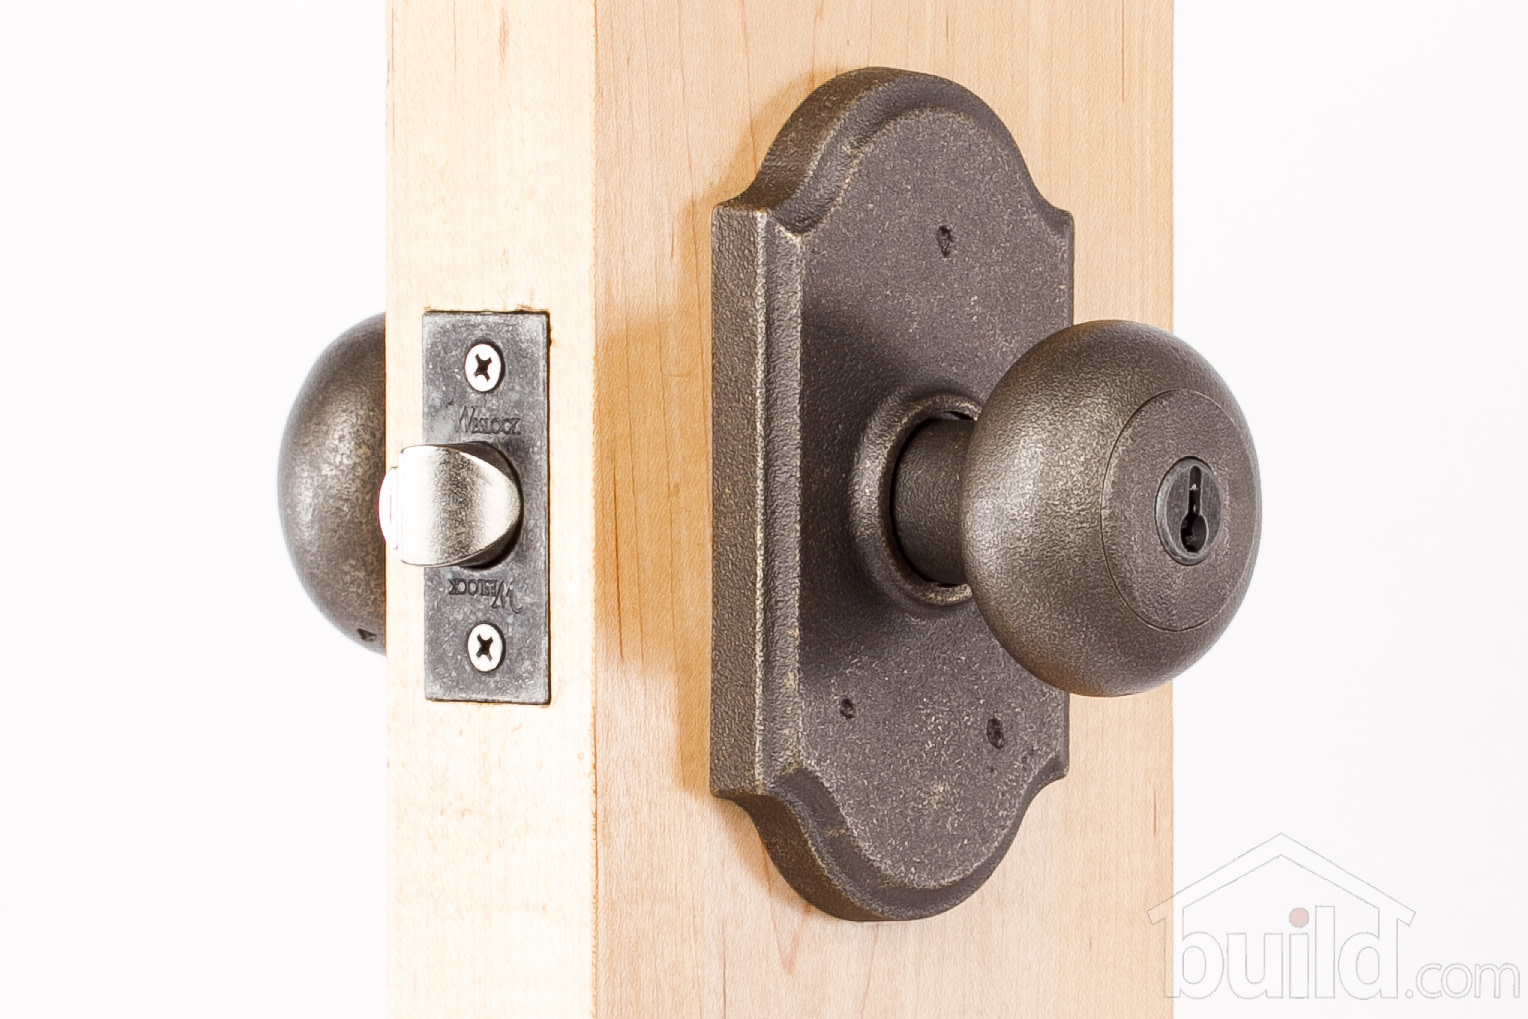 Weslock 07140F1F1SL23 Wexford Premiere Entry Lock with Adjustable Latch and Full Lip Strike Oil Rubbed Bronze Finish - image 3 of 7